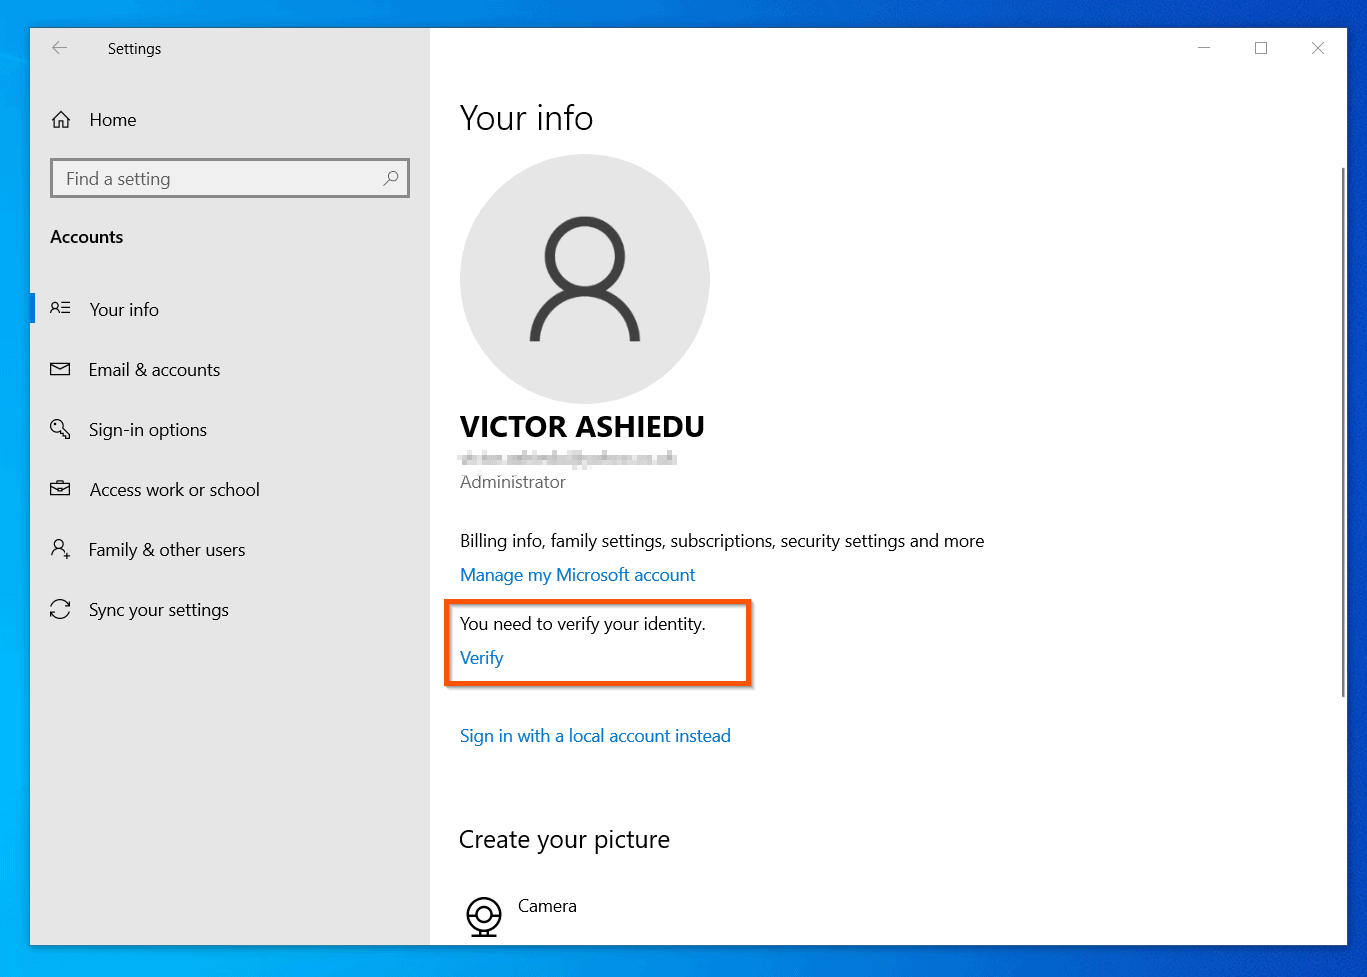 Where is sync in my settings?